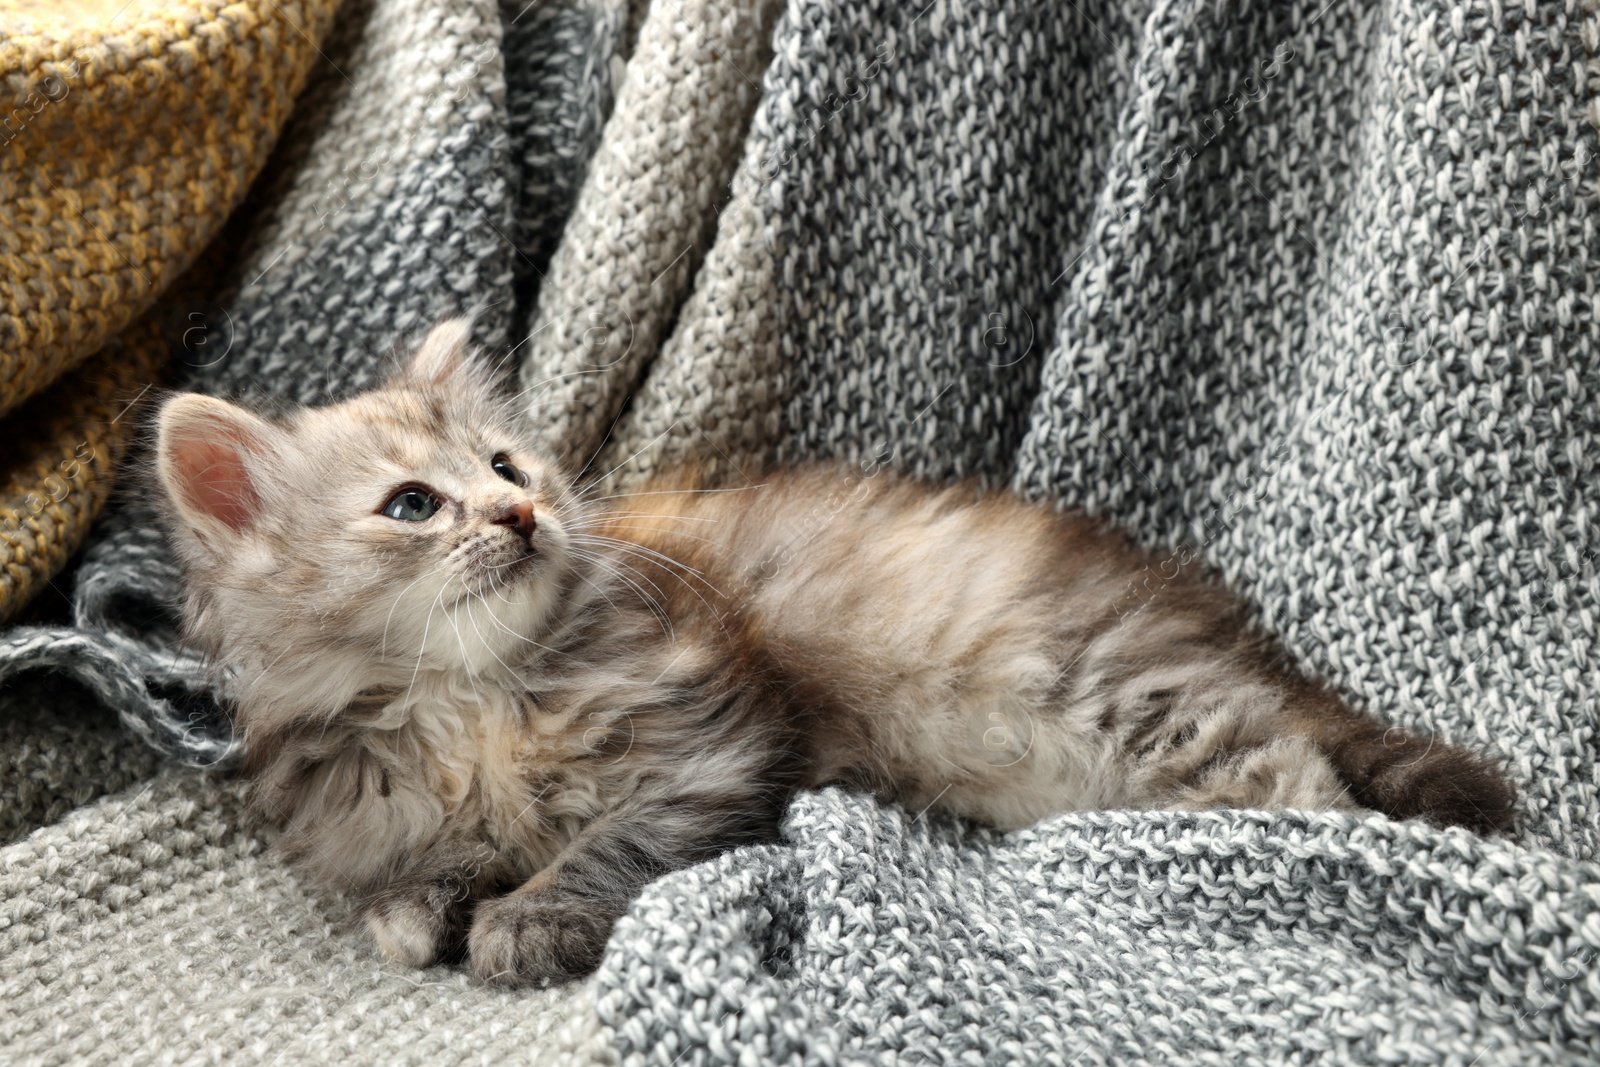 Photo of Cute kitten on knitted blanket. Baby animal